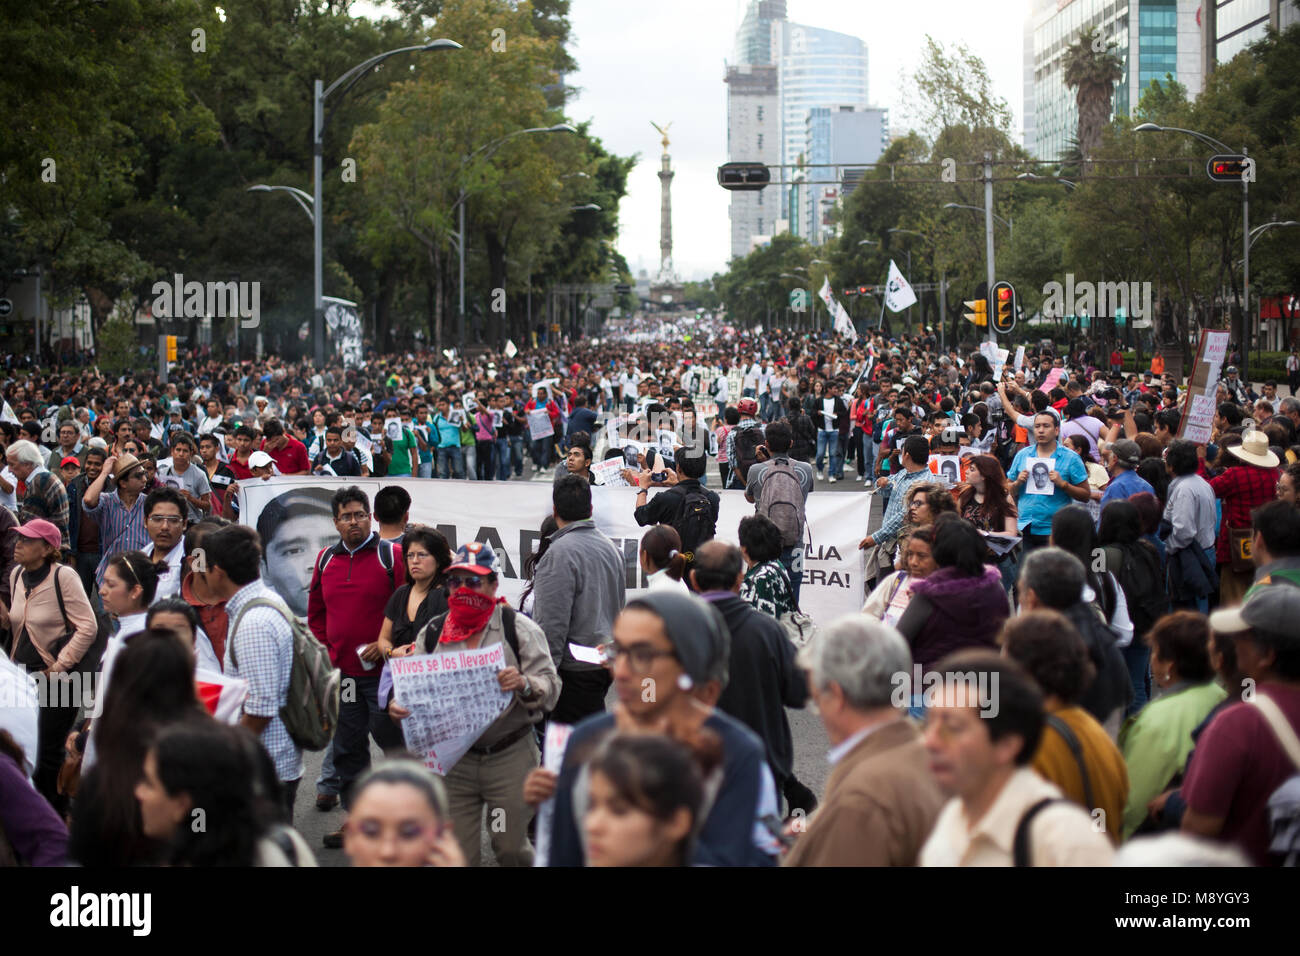 People march through Mexico City protesting for the return of 43 missing Normalista students who were taken from Ayotzinapa teaching college in Iguala, Mexico, during the 'Global Day of Action for Ayotzinapa' on Wednesday, October 23, 2014.  Three students were killed and 43 more have been missing since September 26, 2014. The local mayor and his wife were accused of ordering the kidnappings and killings. The local police were also accused of working with the Guerreros Unidos cartel in the crimes. Stock Photo